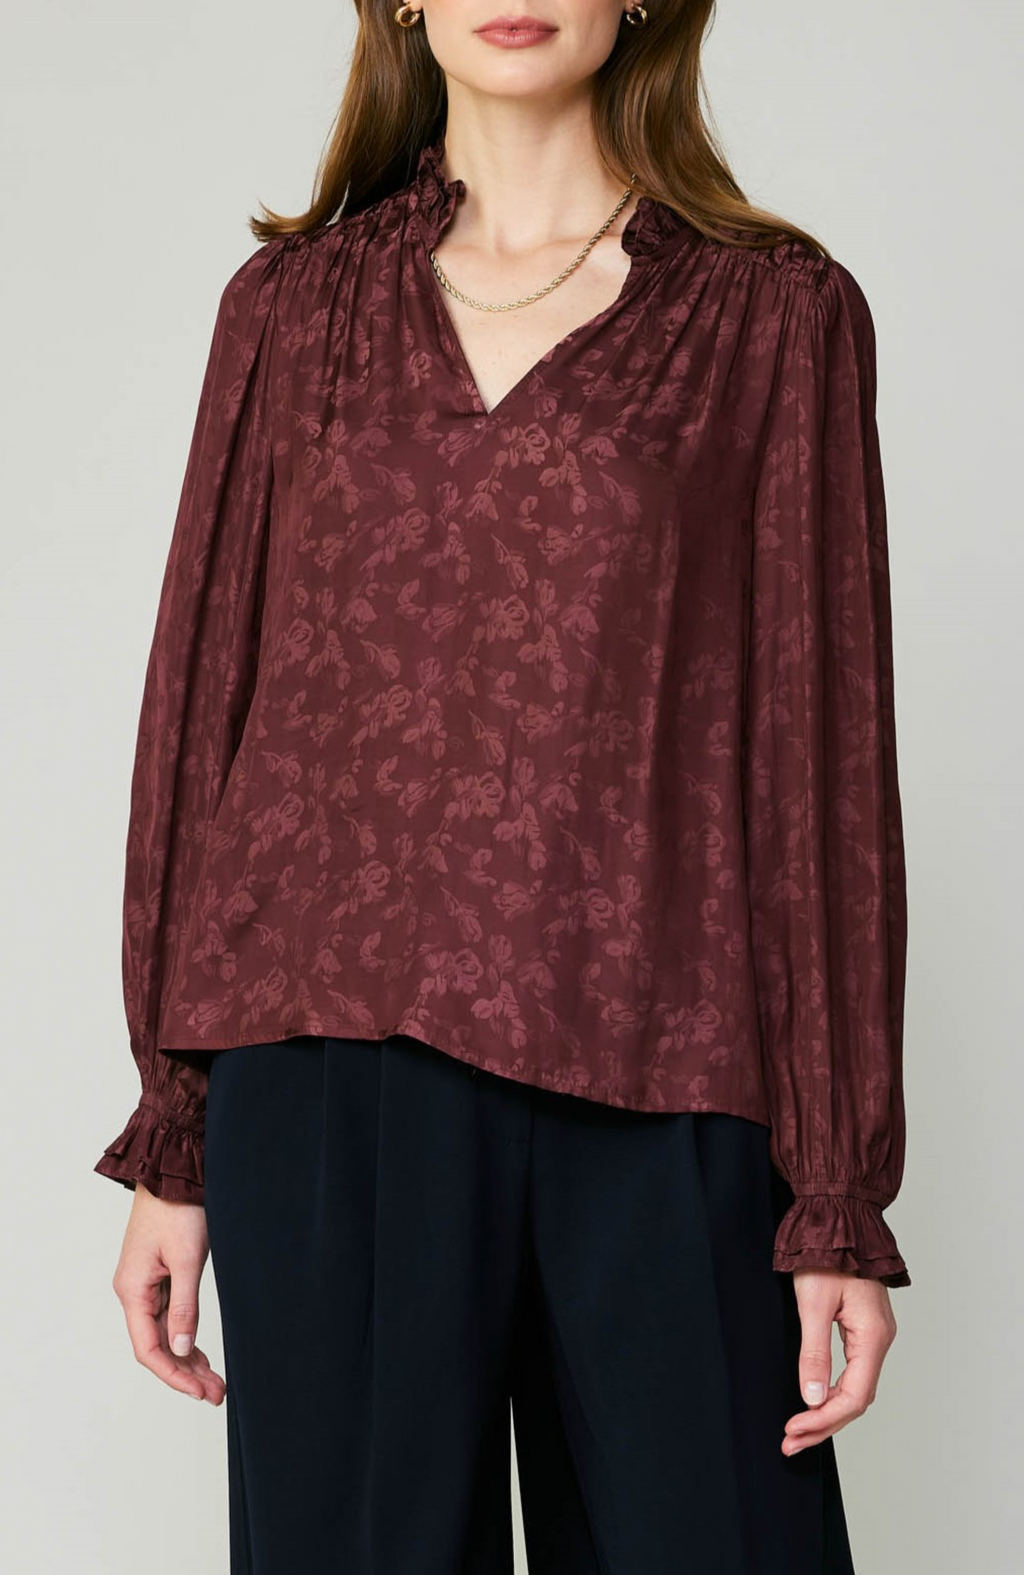 Current Air - Blouse With Floral Print